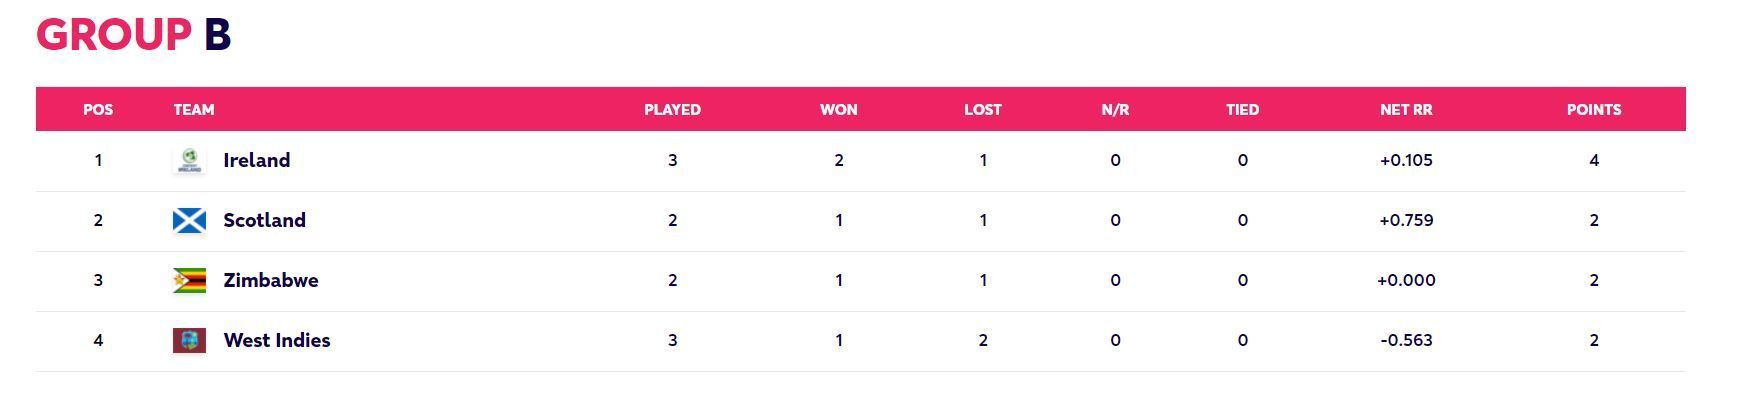 Updated Points Table after Match 11 (Image Courtesy: www.t20worldcup.com)